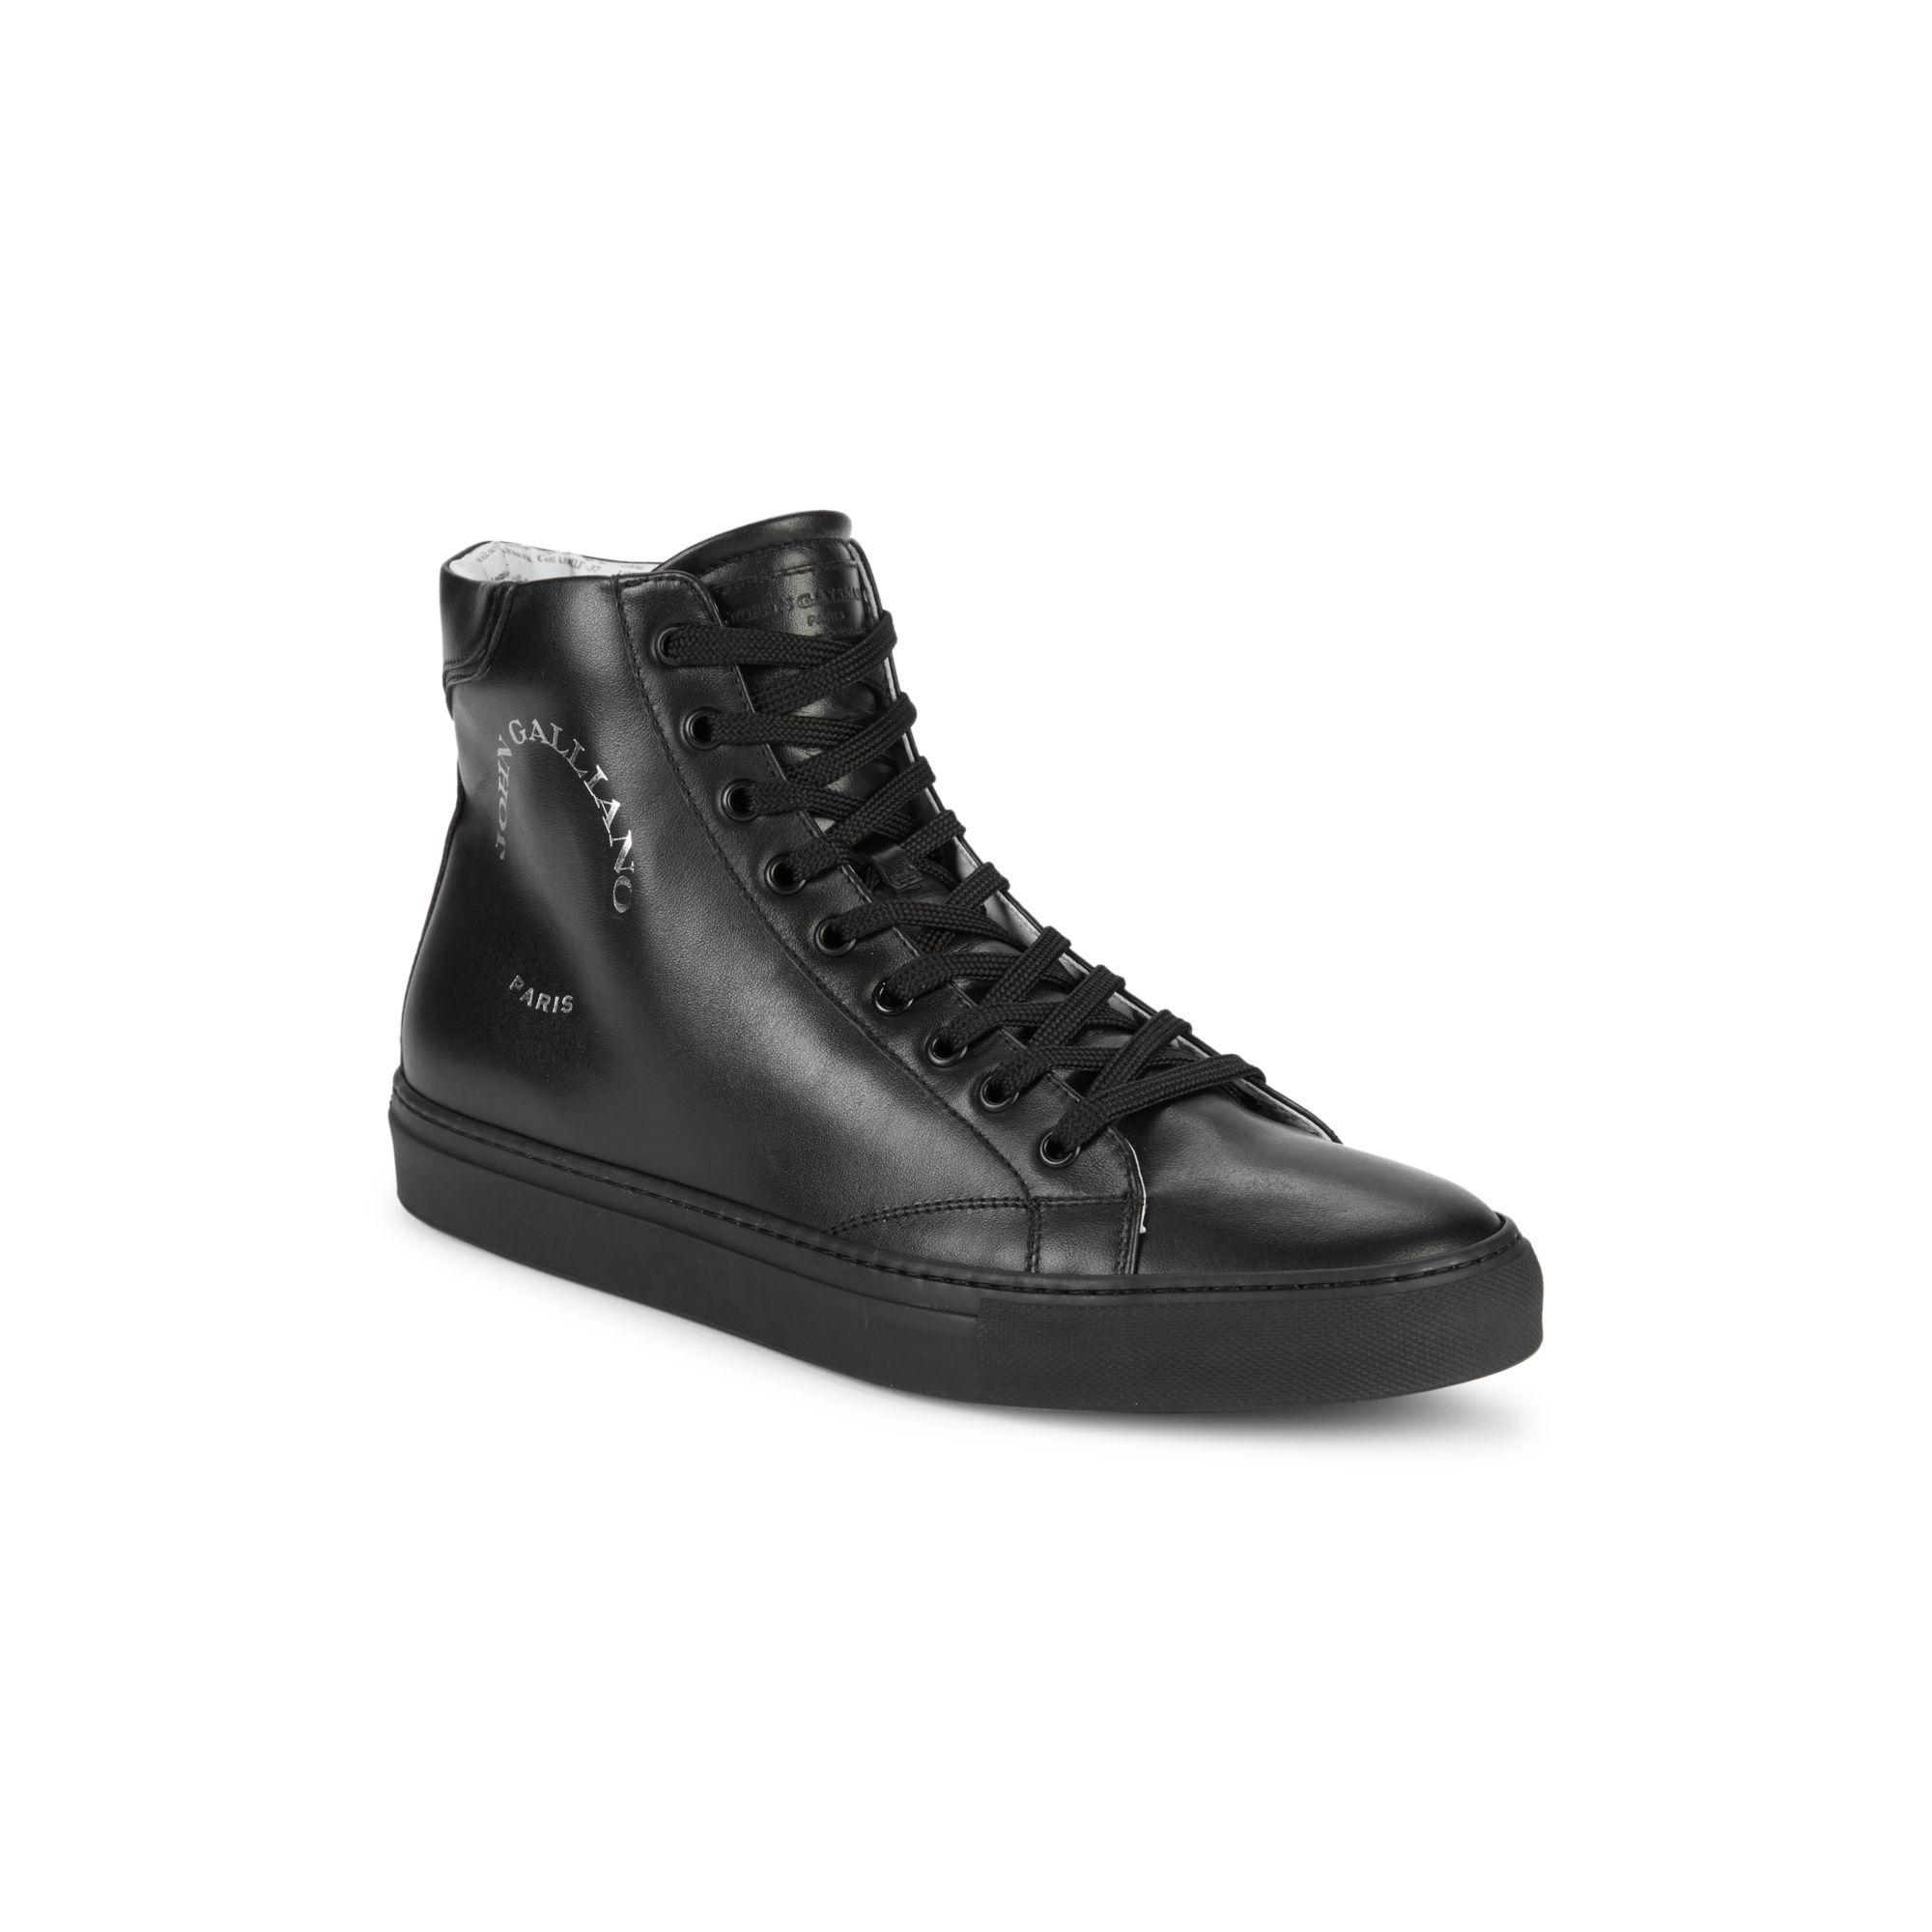 John Galliano High-top Leather Sneakers in Black for Men - Lyst